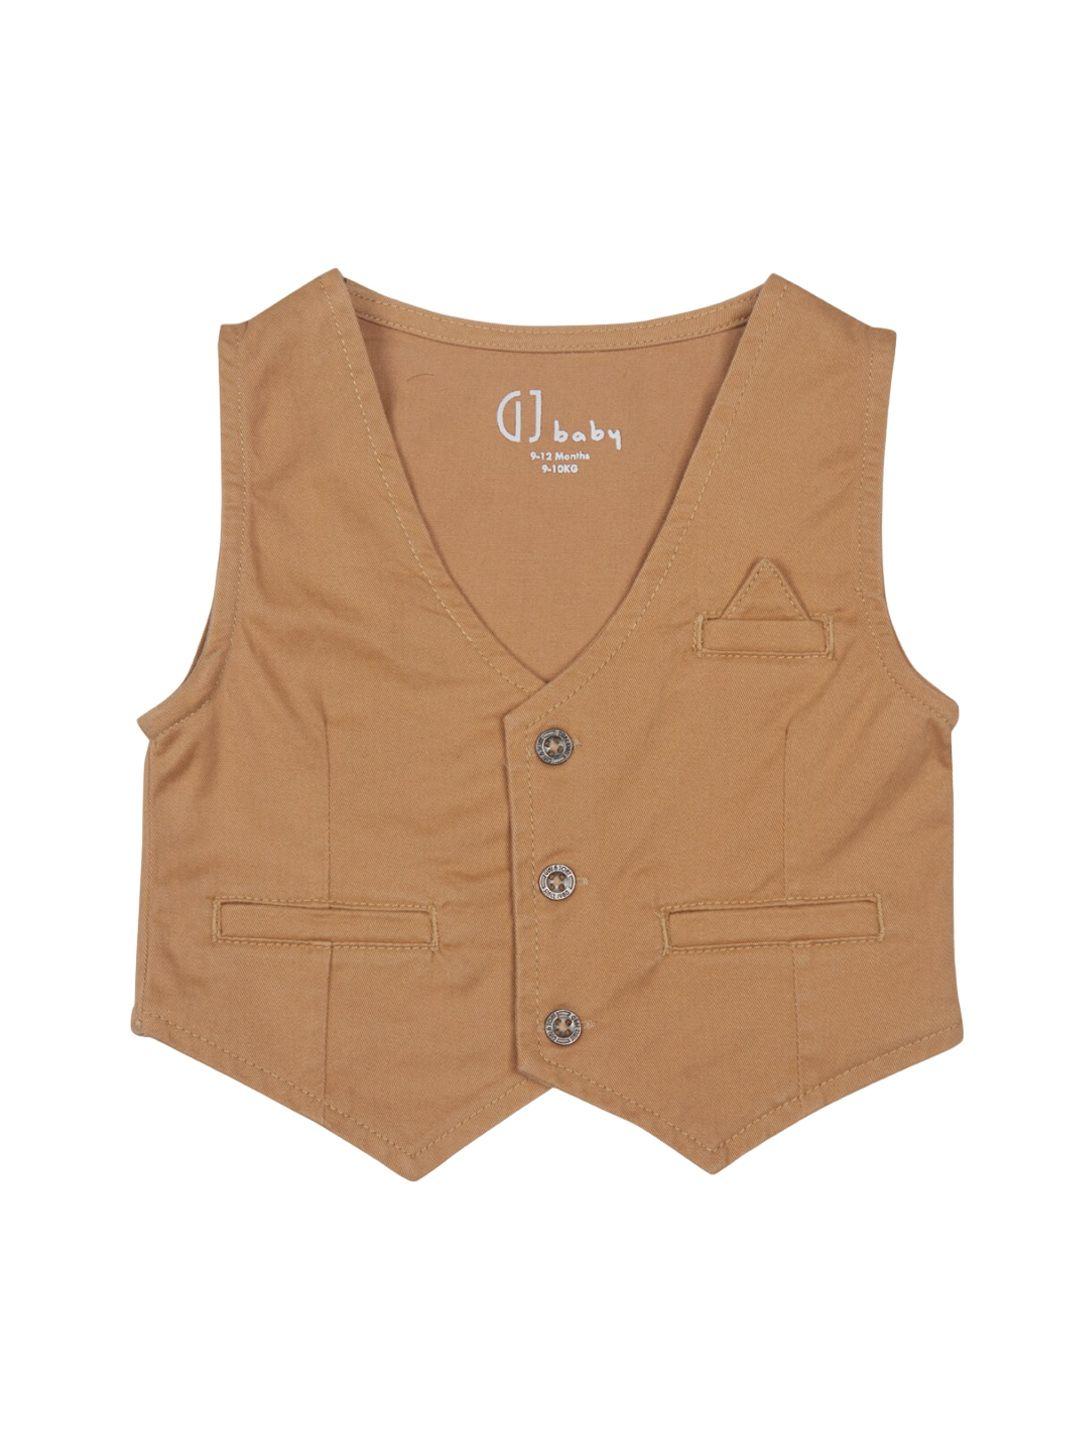 GJ baby Boys Brown Tailored Jacket with Embroidered